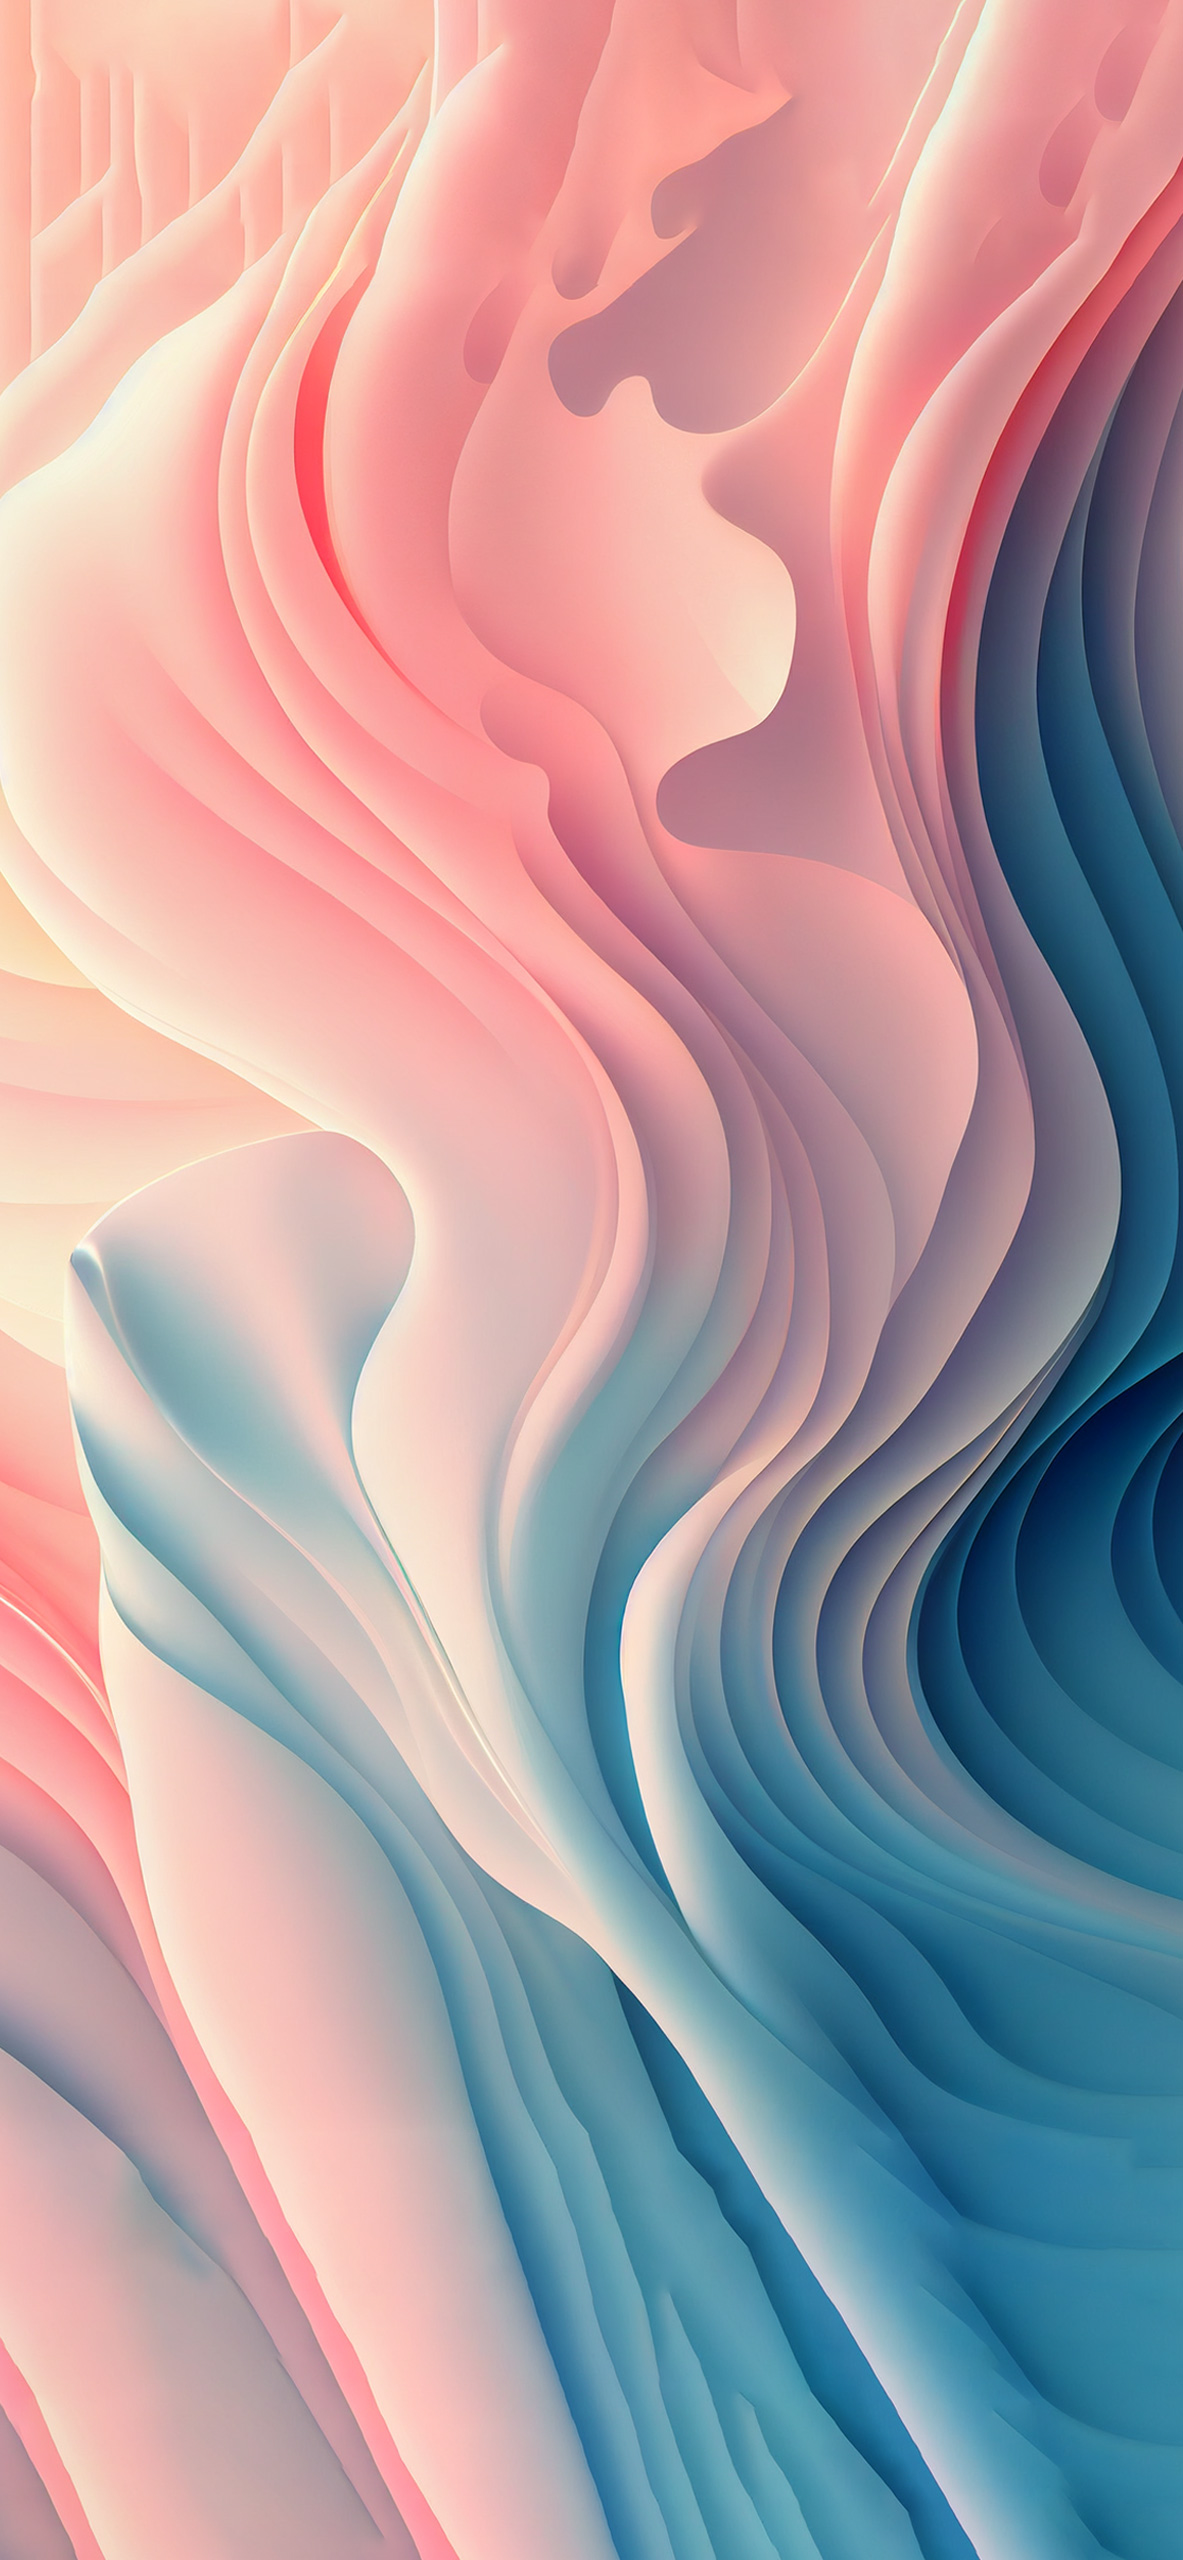 A colorful abstract wallpaper with wave forms - Abstract